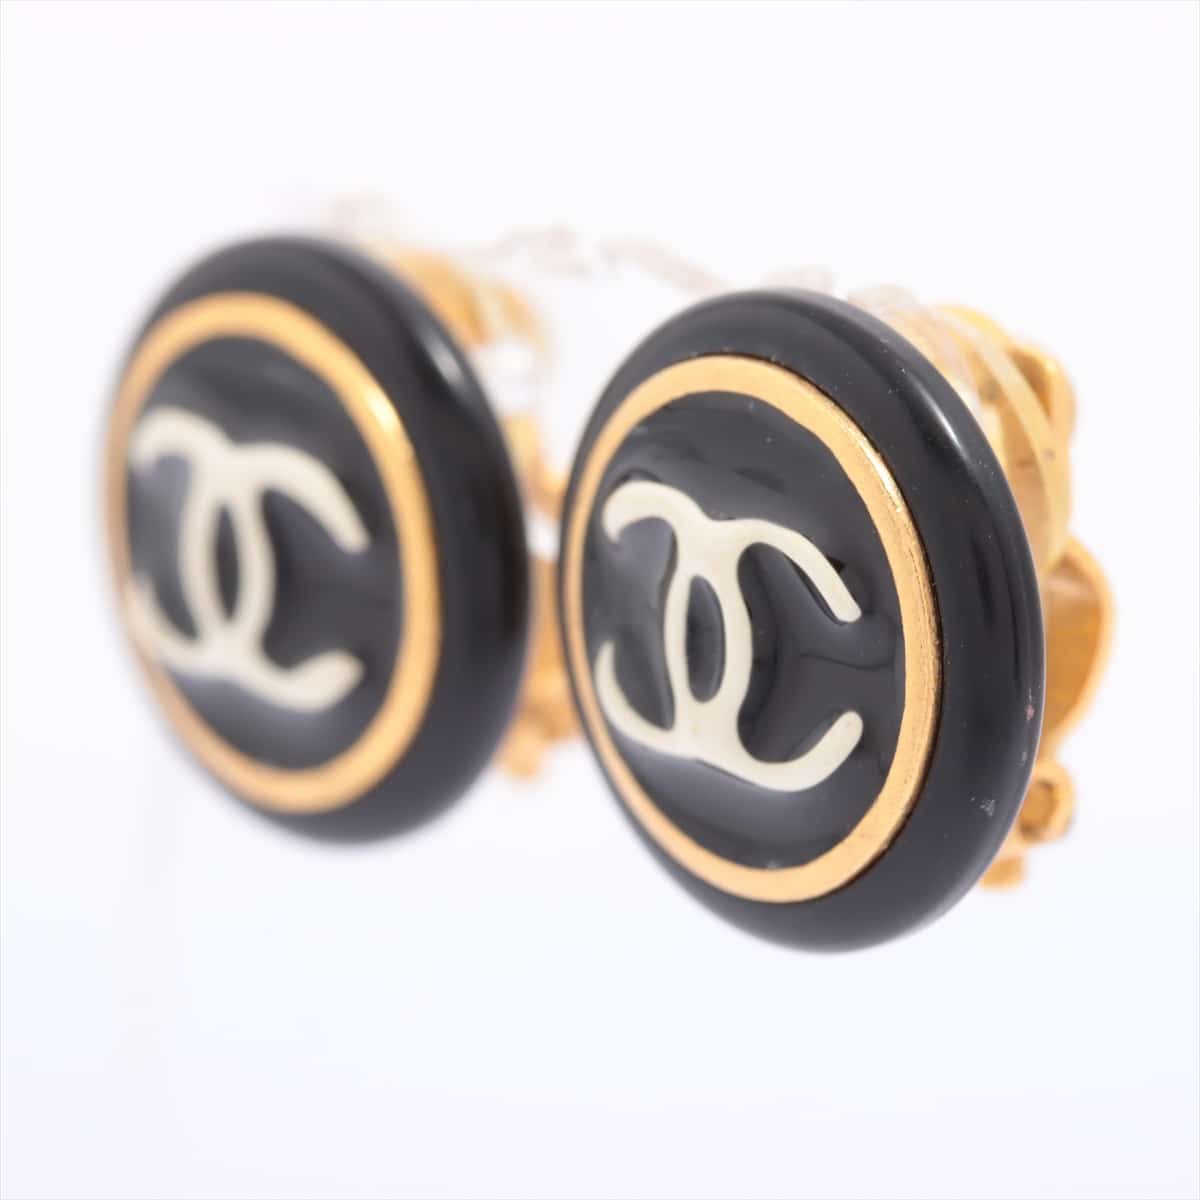 Chanel Coco Mark 97P Earrings (for both ears) GP Black×Gold